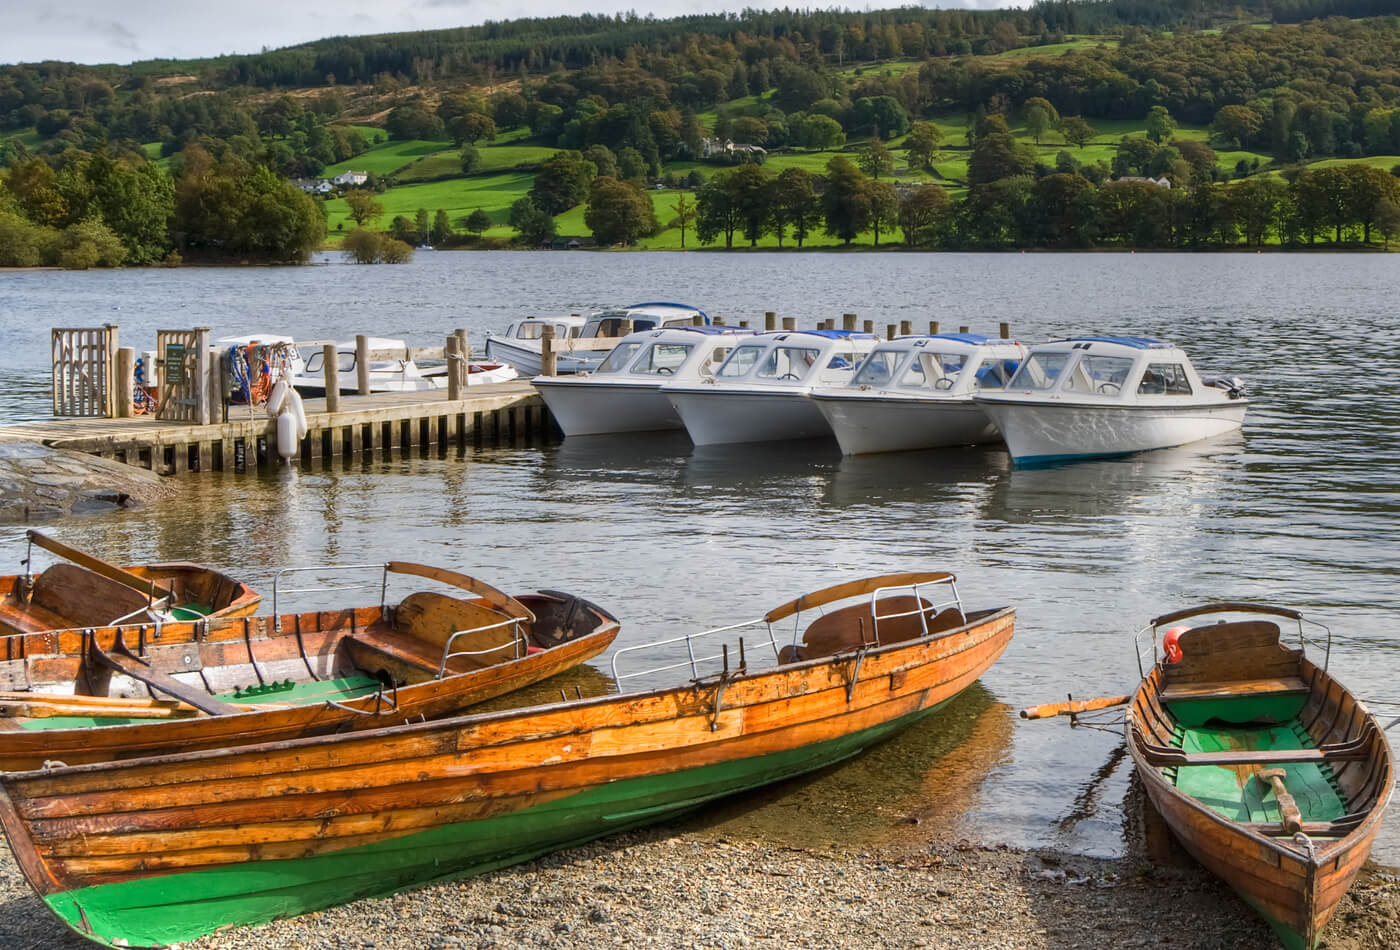 Boats on the shore of Coniston Water